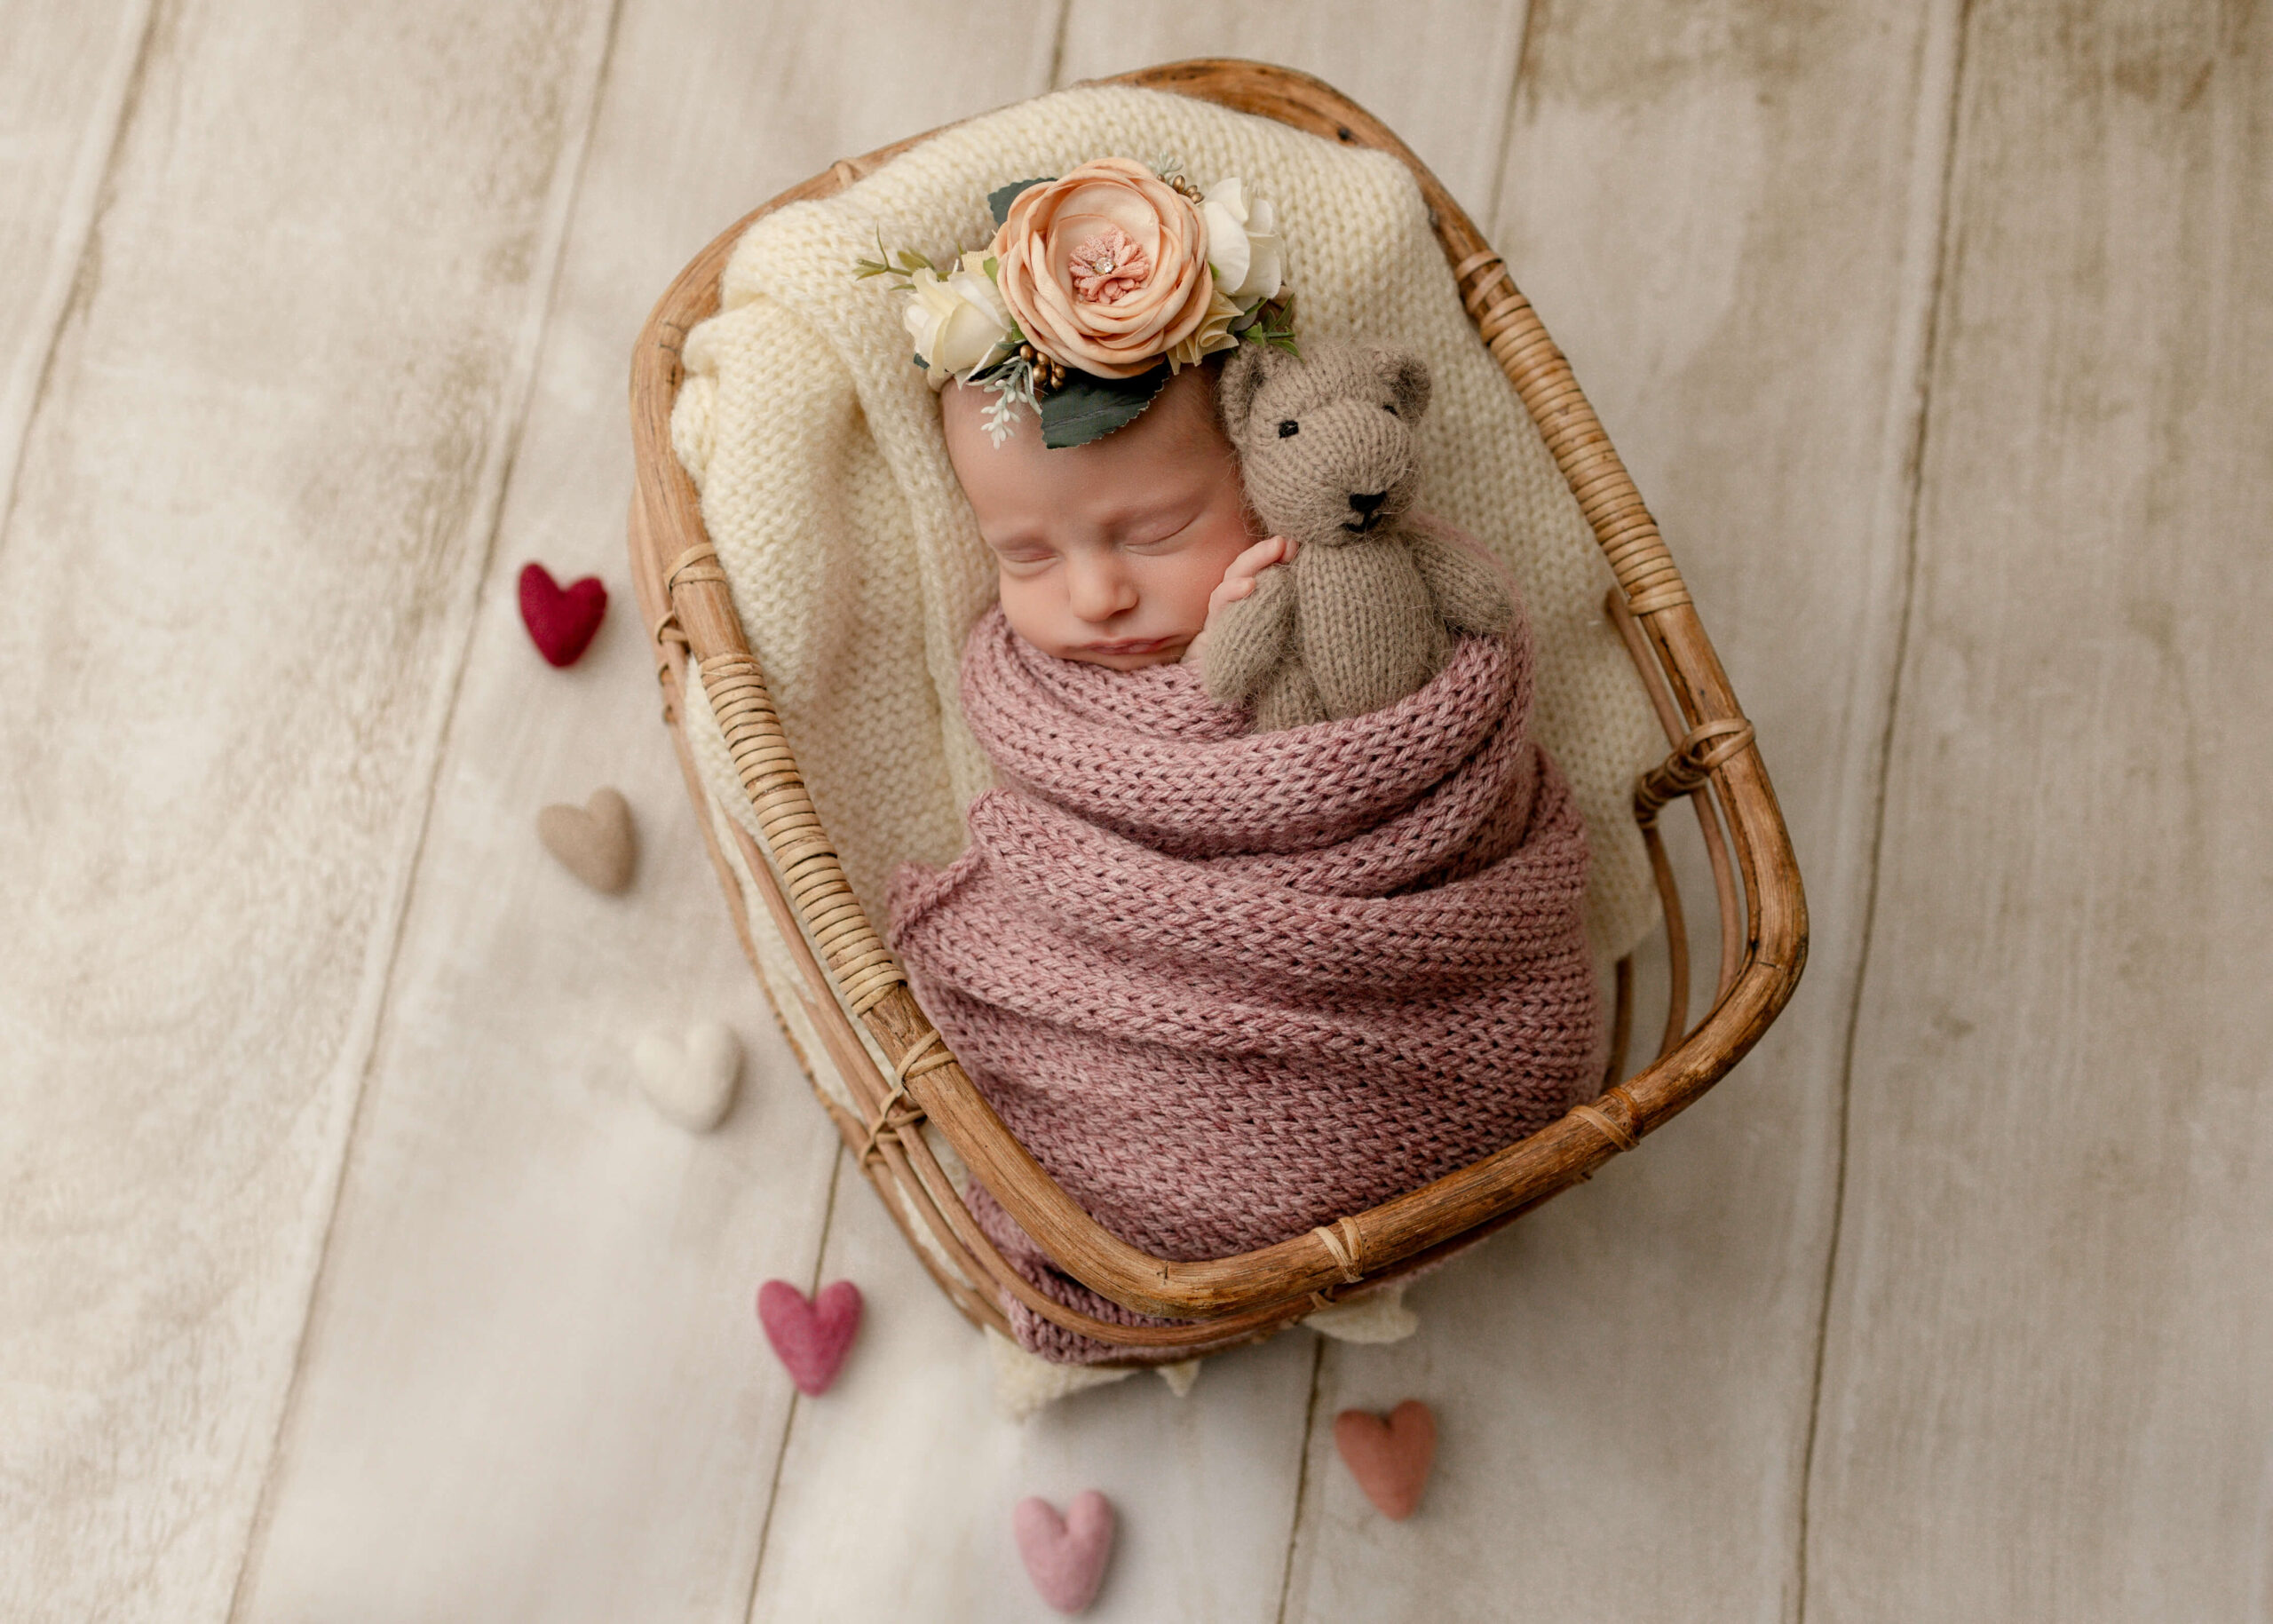 Baby posed in basket with teddy bear by Ashley Nicole Photography.